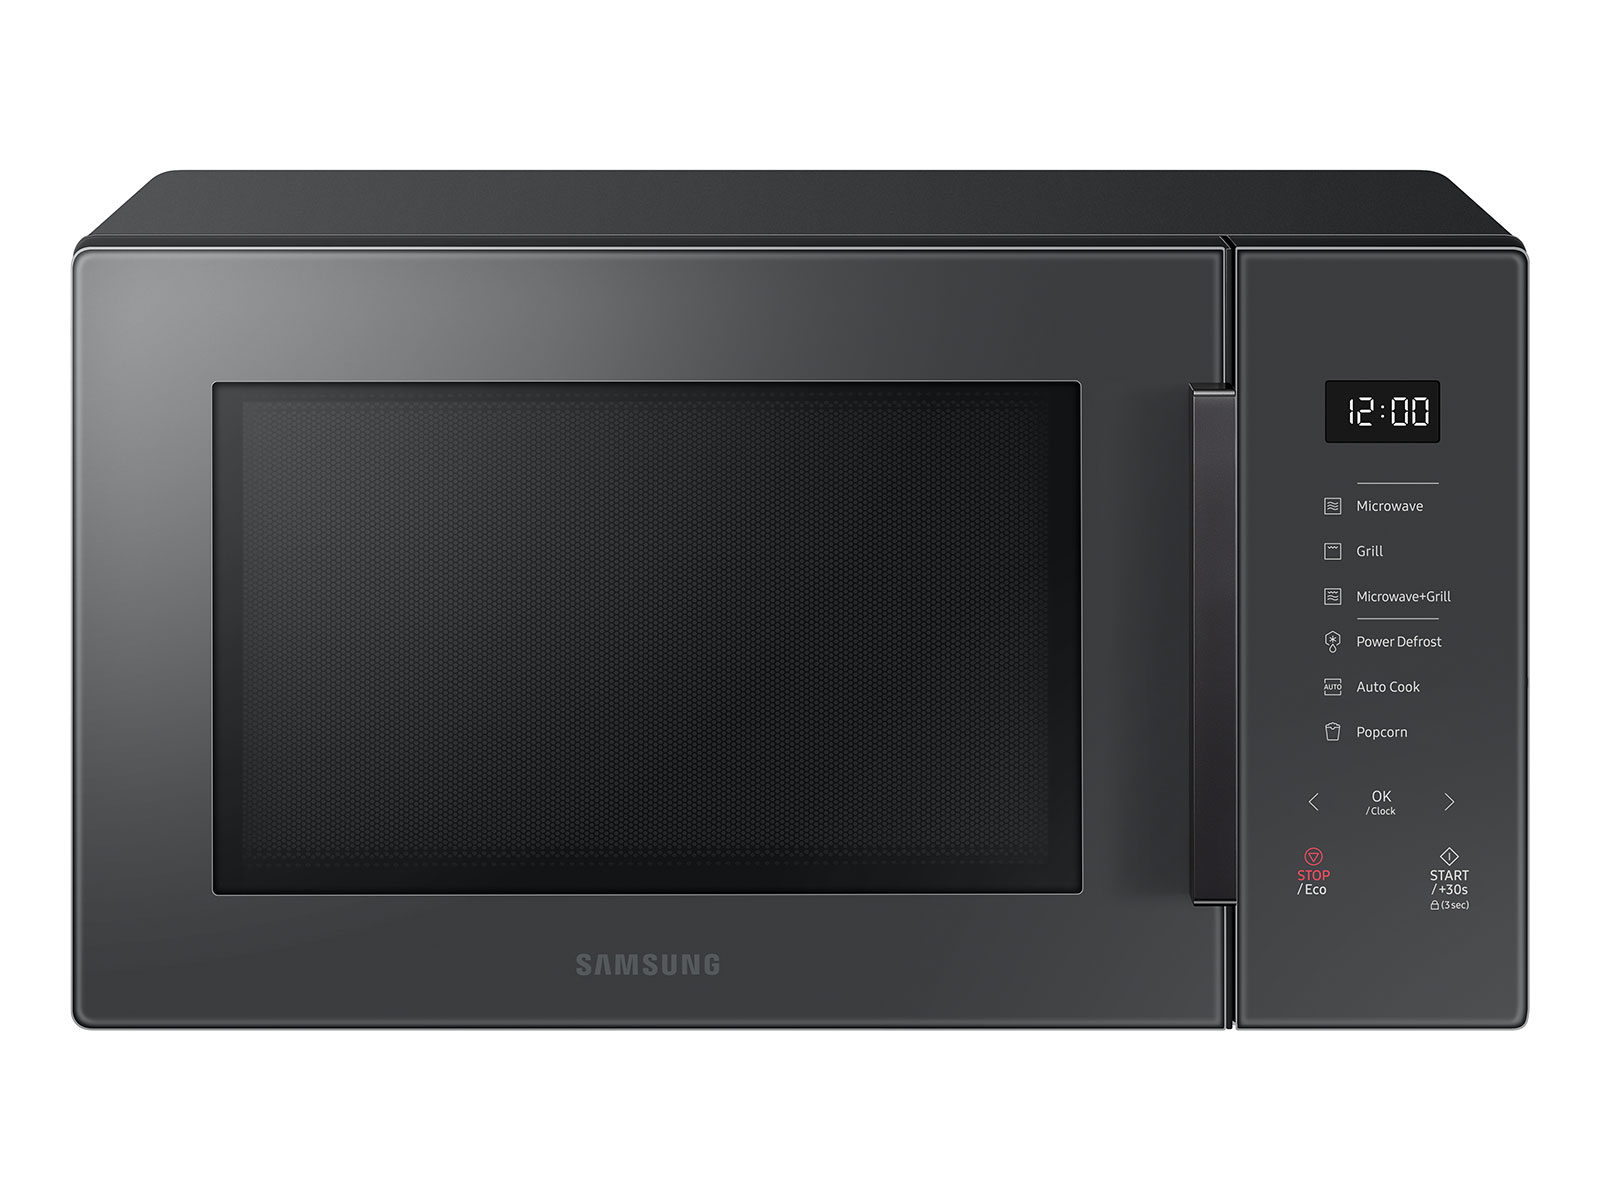 https://image-us.samsung.com/SamsungUS/home/home-appliances/microwaves/40620/gallery/PDP-Gallery-MG11T5018CC-AA_001_Front_Cotta-Charcoal-1600x1200.jpg?$product-details-jpg$